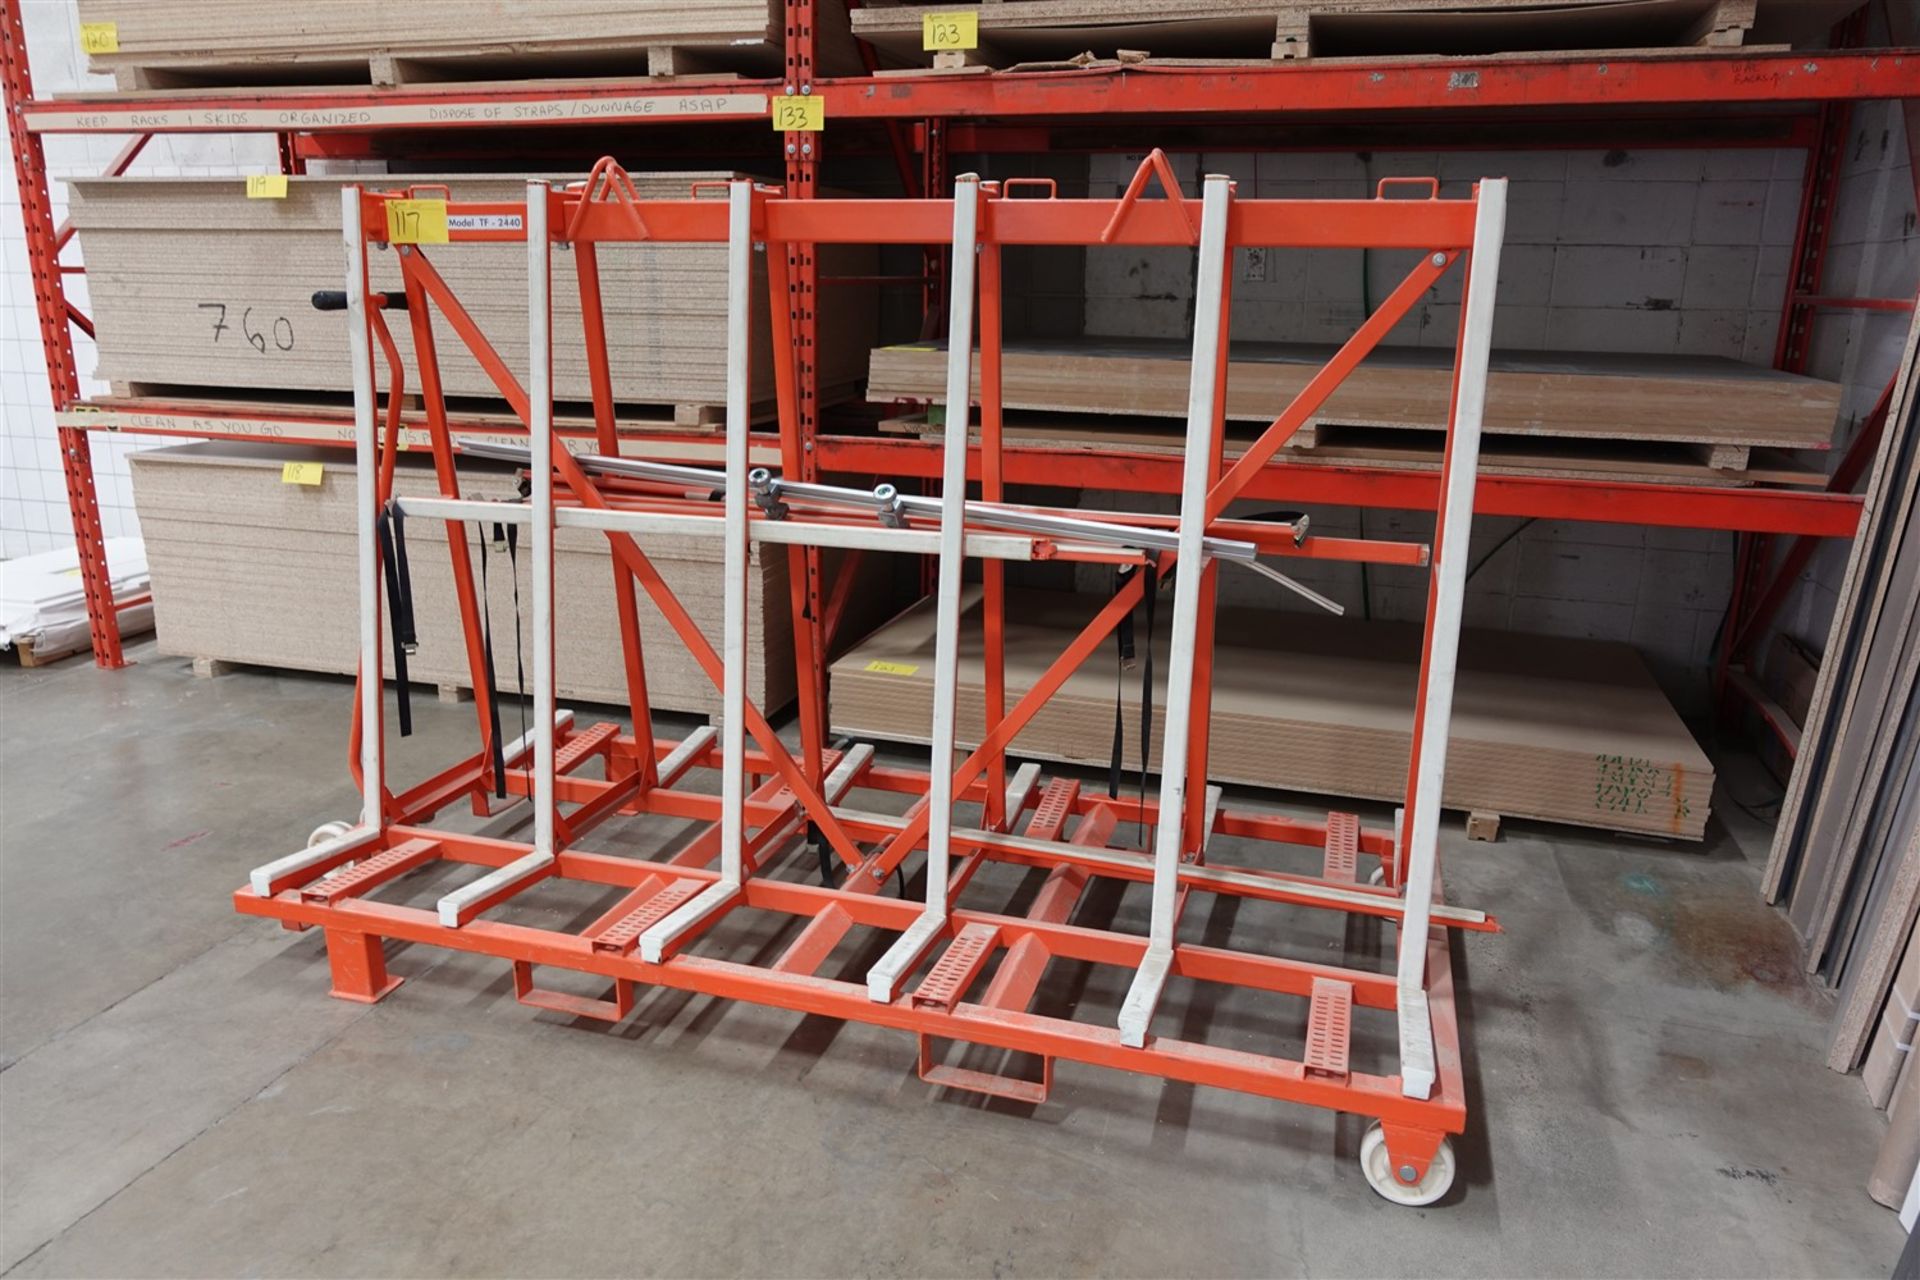 AARDWOLF TRANSPORT FRAME W/ CASTERS, 1,500 KGS CAPACITY, MODEL TF-2440 - Image 2 of 2